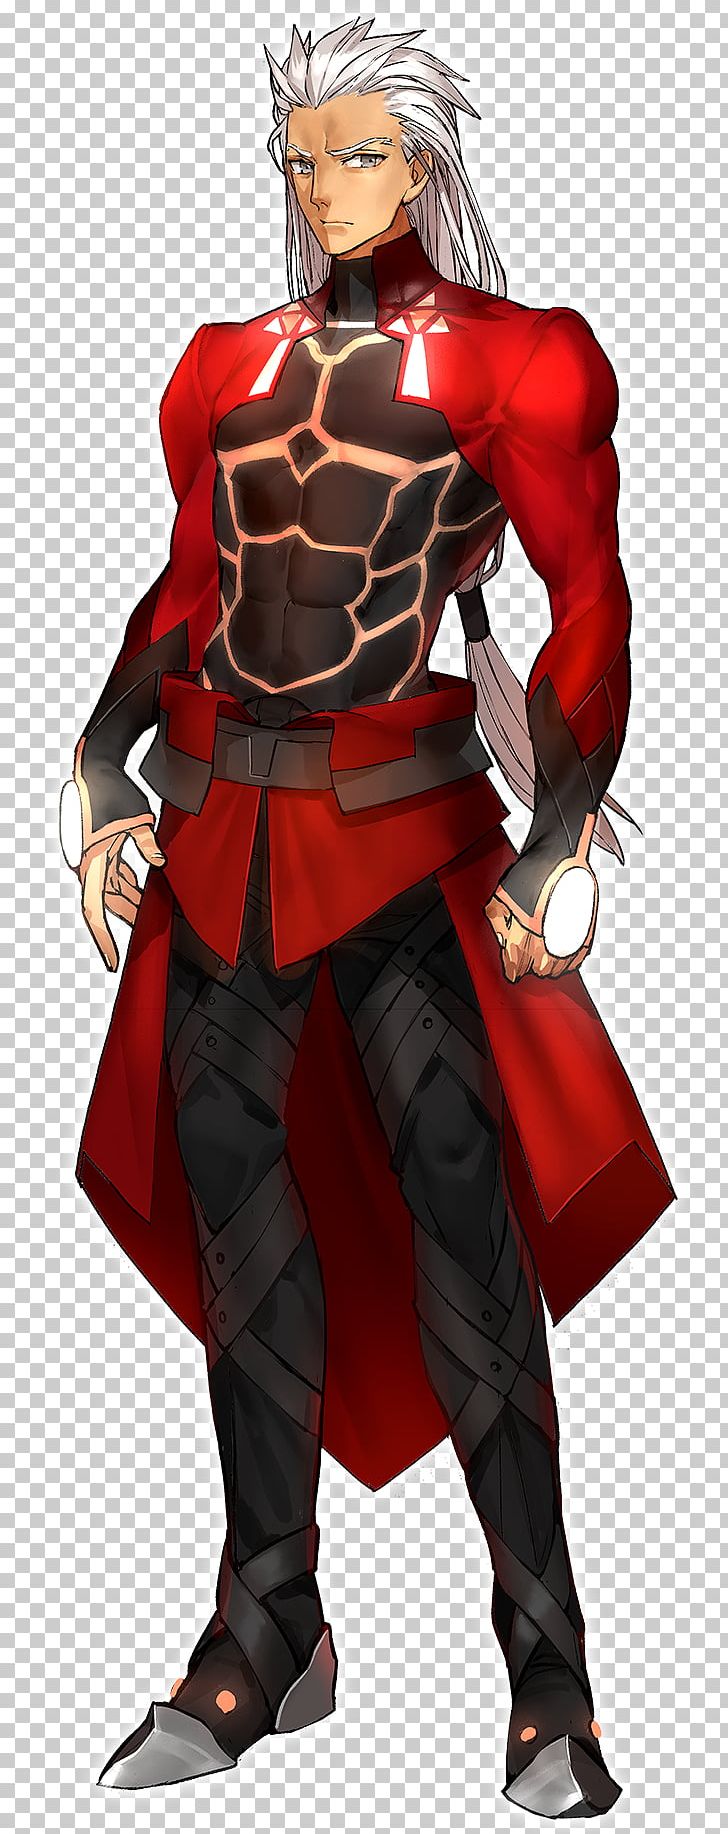 Fate/Extra Fate/stay Night Fate/Extella: The Umbral Star Archer Shirou Emiya PNG, Clipart, Archer, Armour, Character, Costume, Costume Design Free PNG Download